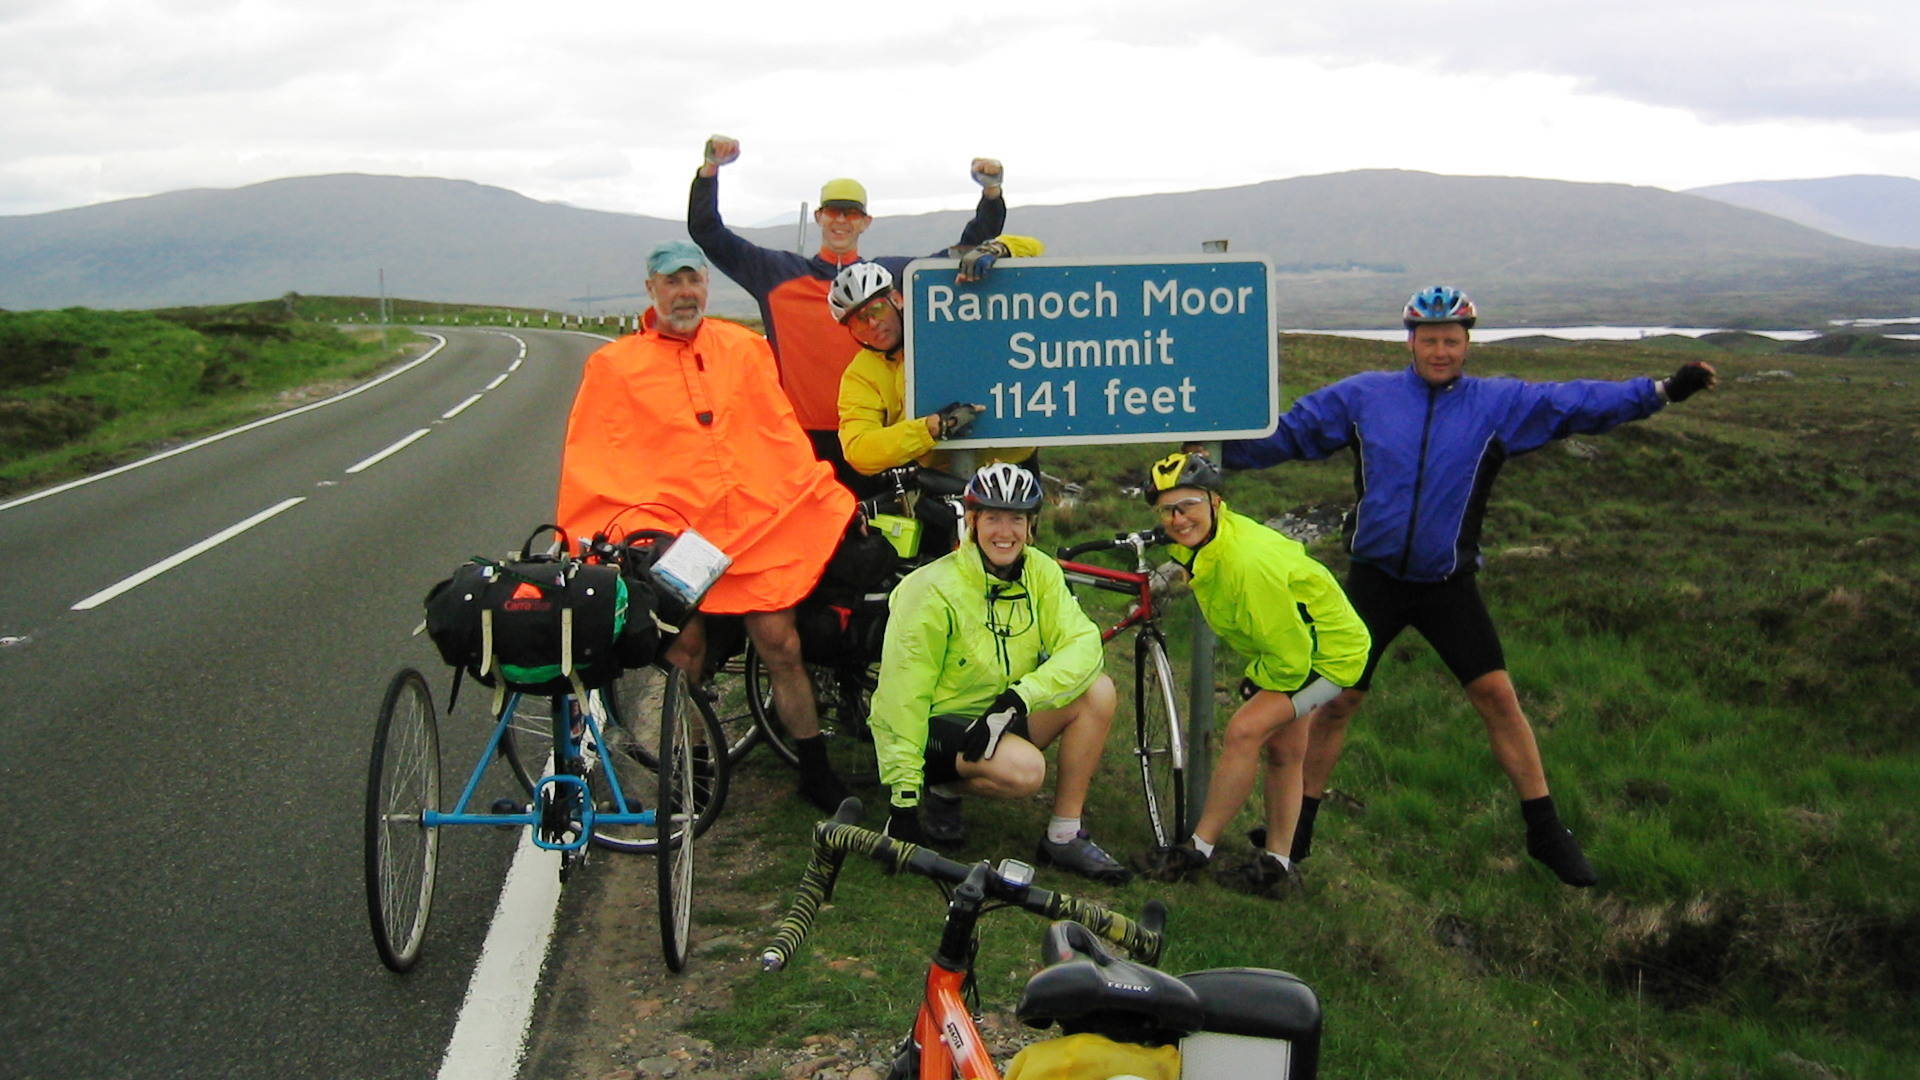 Group pose at Rannoch Moor sign.